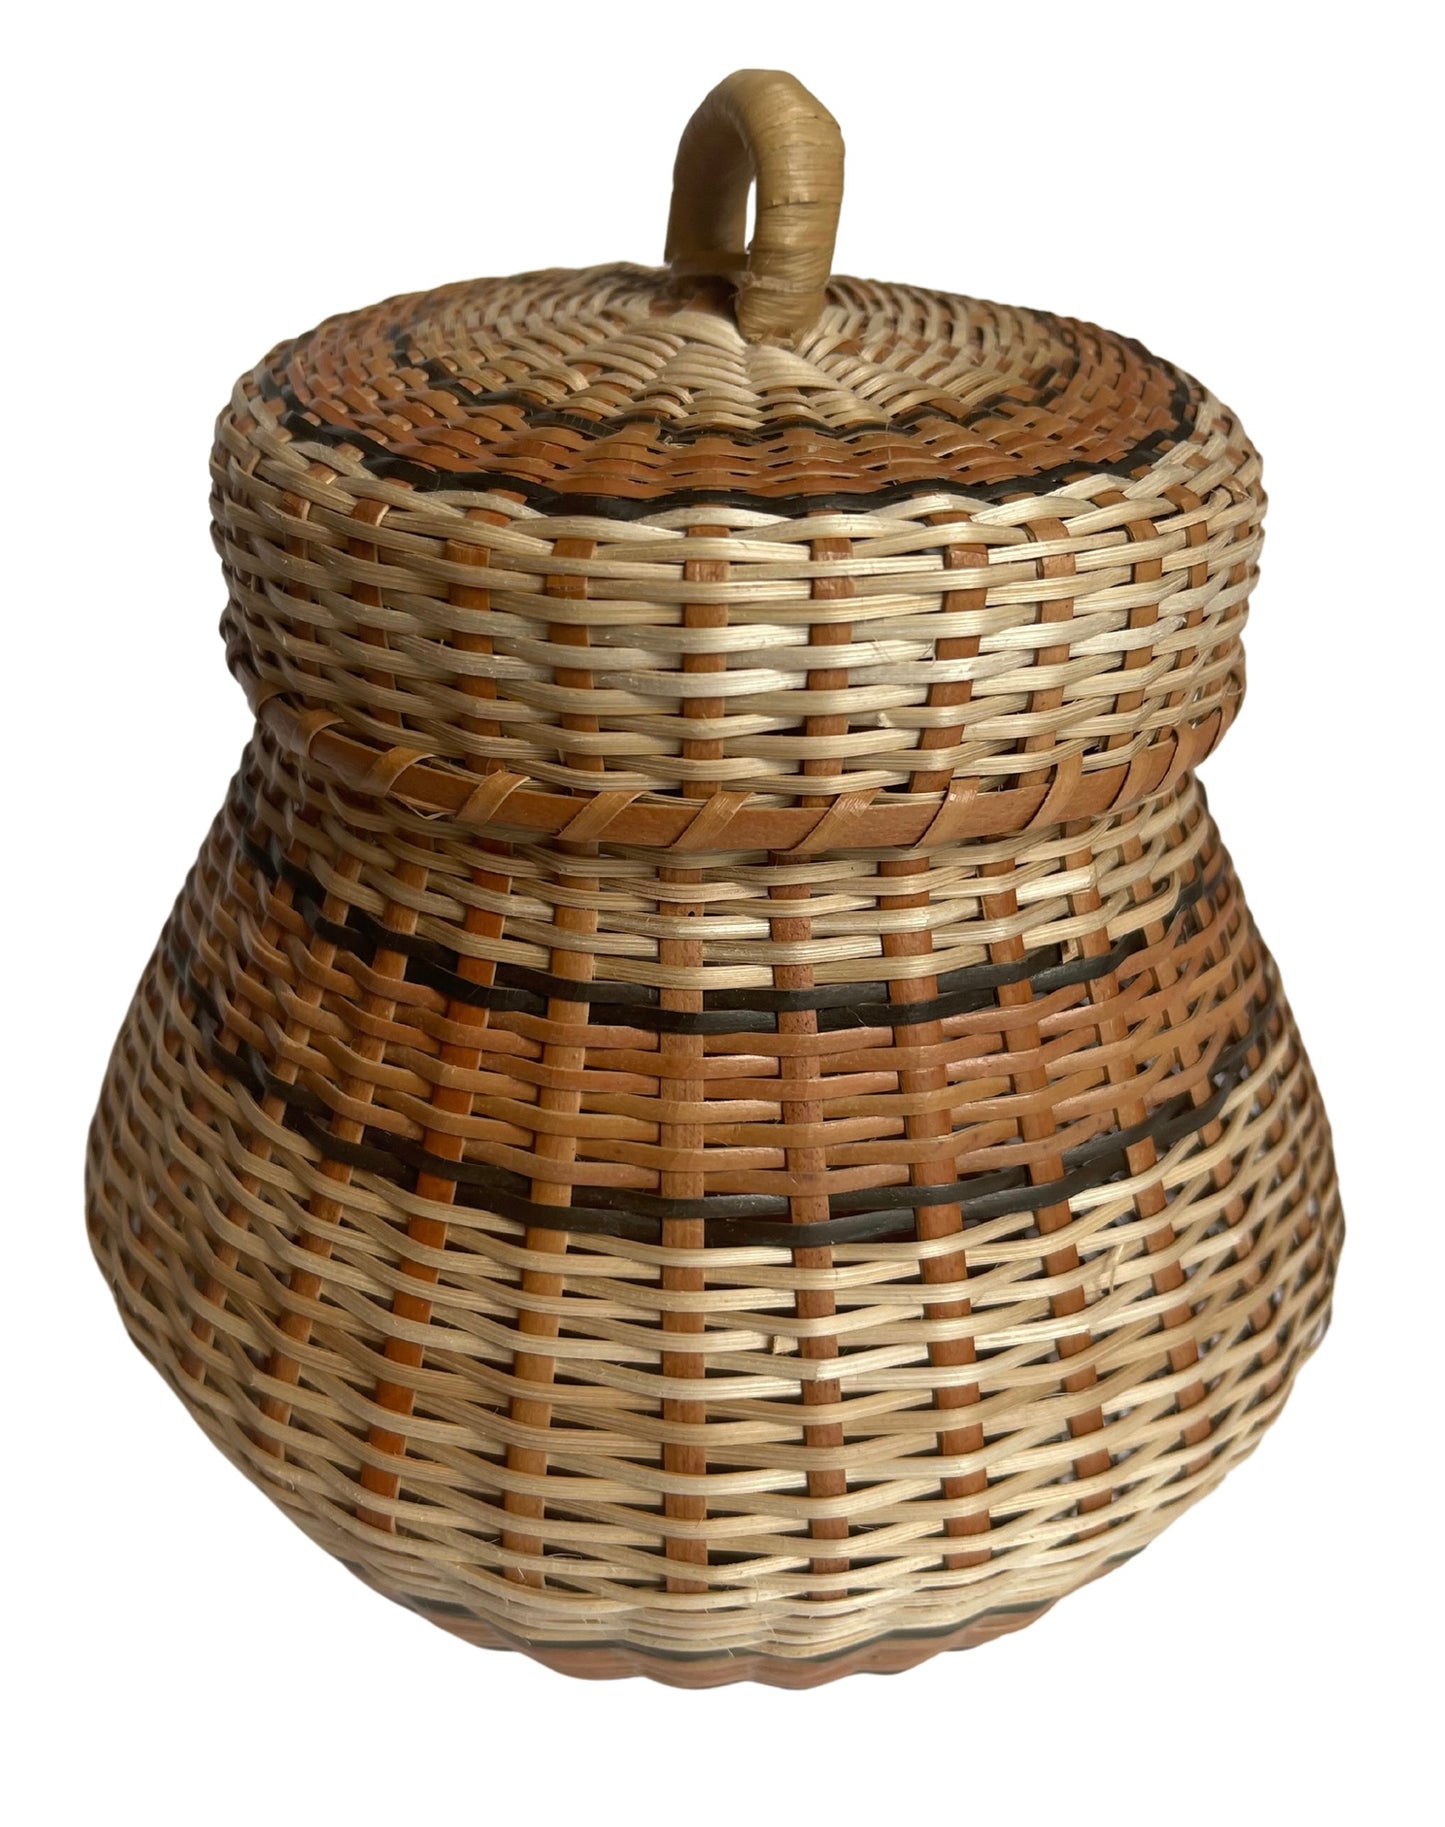 Dominica Assorted Baskets | Carib Indians Baskets | Buydominicaonlin